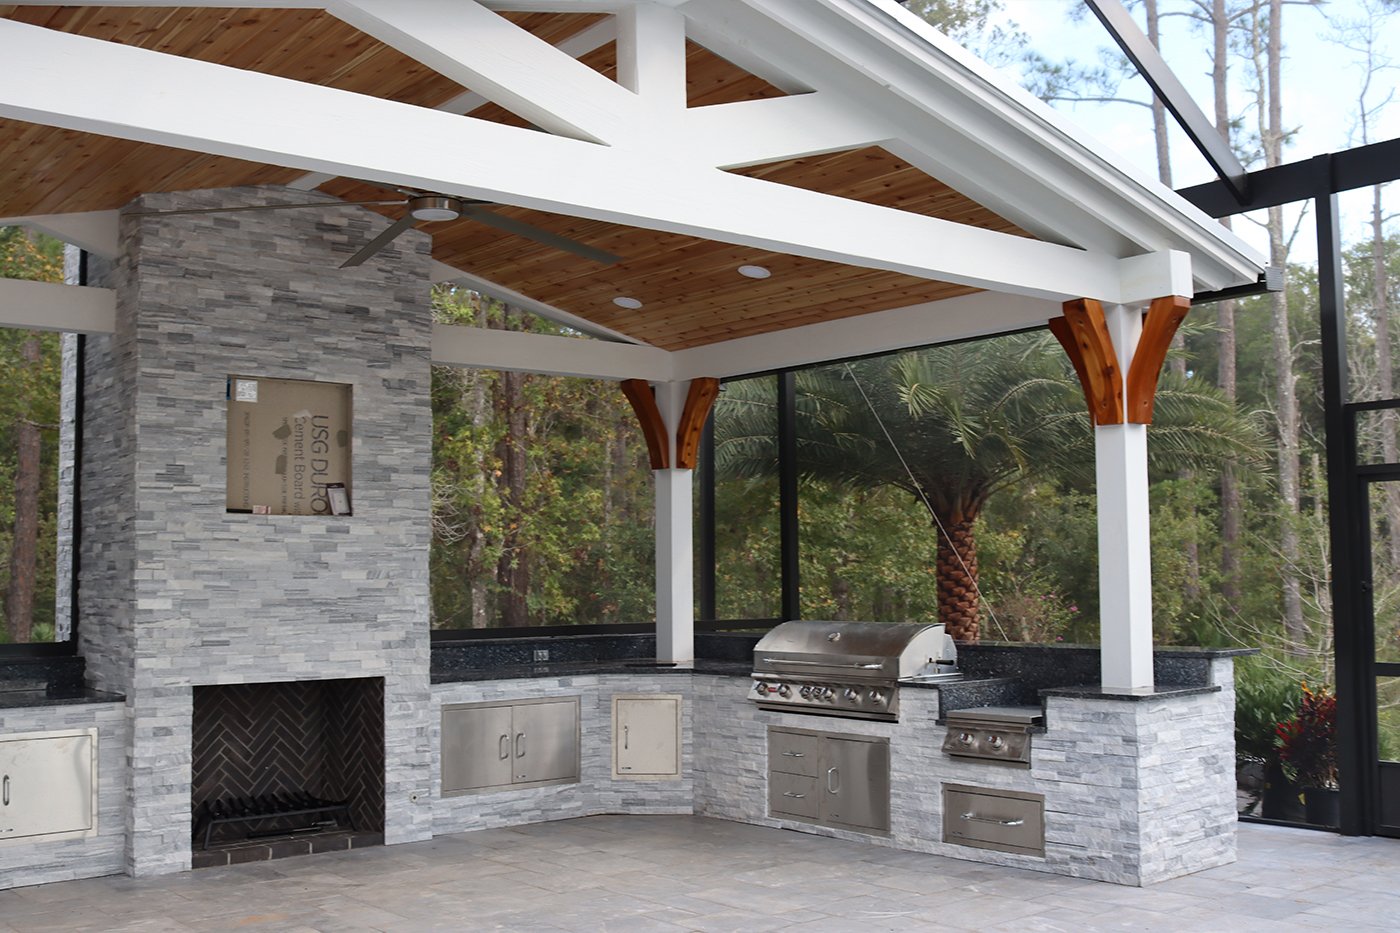 Selecting the Right Materials for Your Outdoor Kitchen